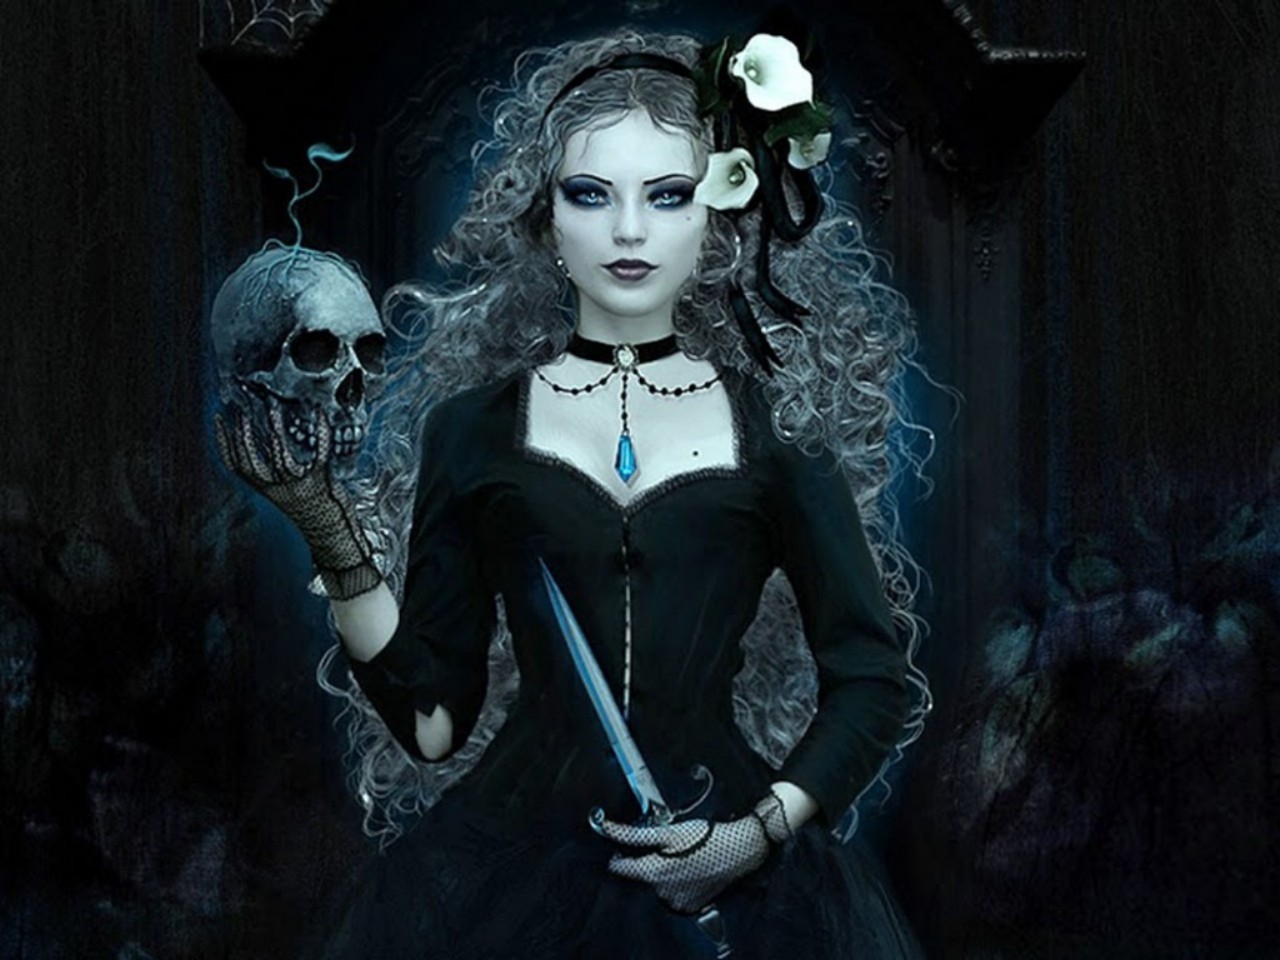 10 4k Ultra Hd Gothic Wallpapers Background Images Wa Vrogue Co